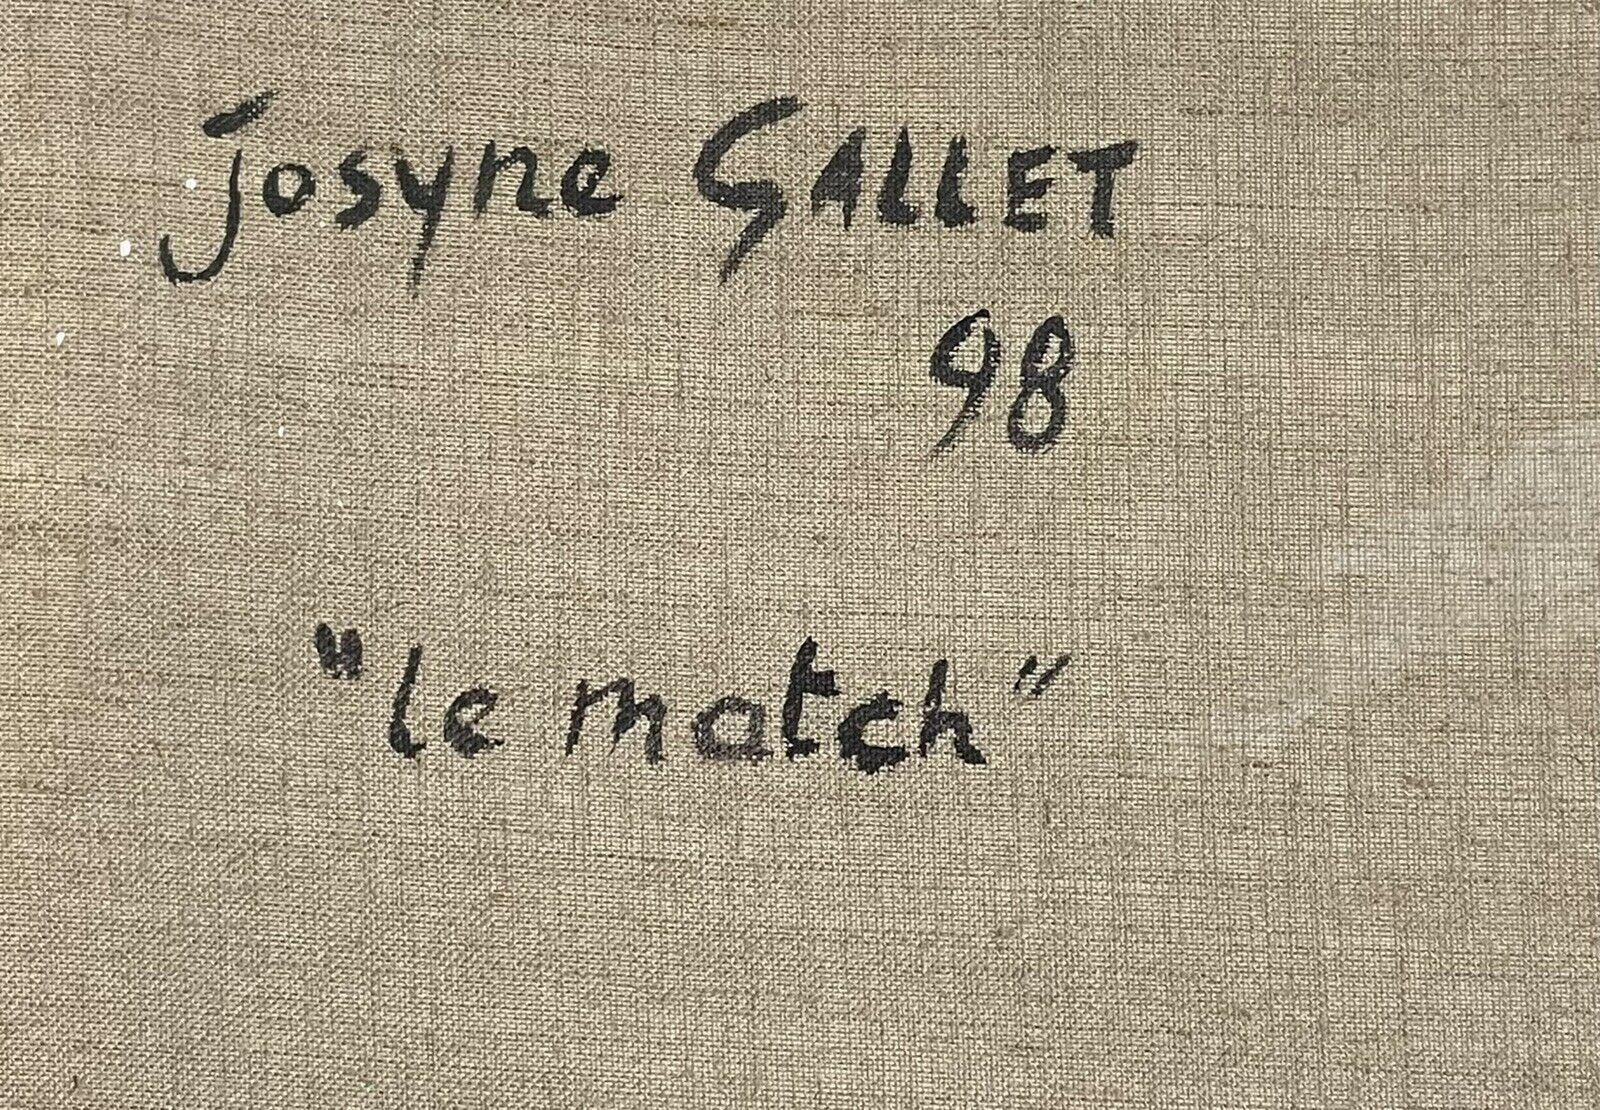 Artist/ School: Josyne Gallet

Title: ' La Match'

Medium: signed oil painting on canvas, framed

framed: 29.5  x  24.25 inches
canvas: 28.75 x 23.75 inches

Provenance: private collection, France

Condition: The painting is in overall very good and